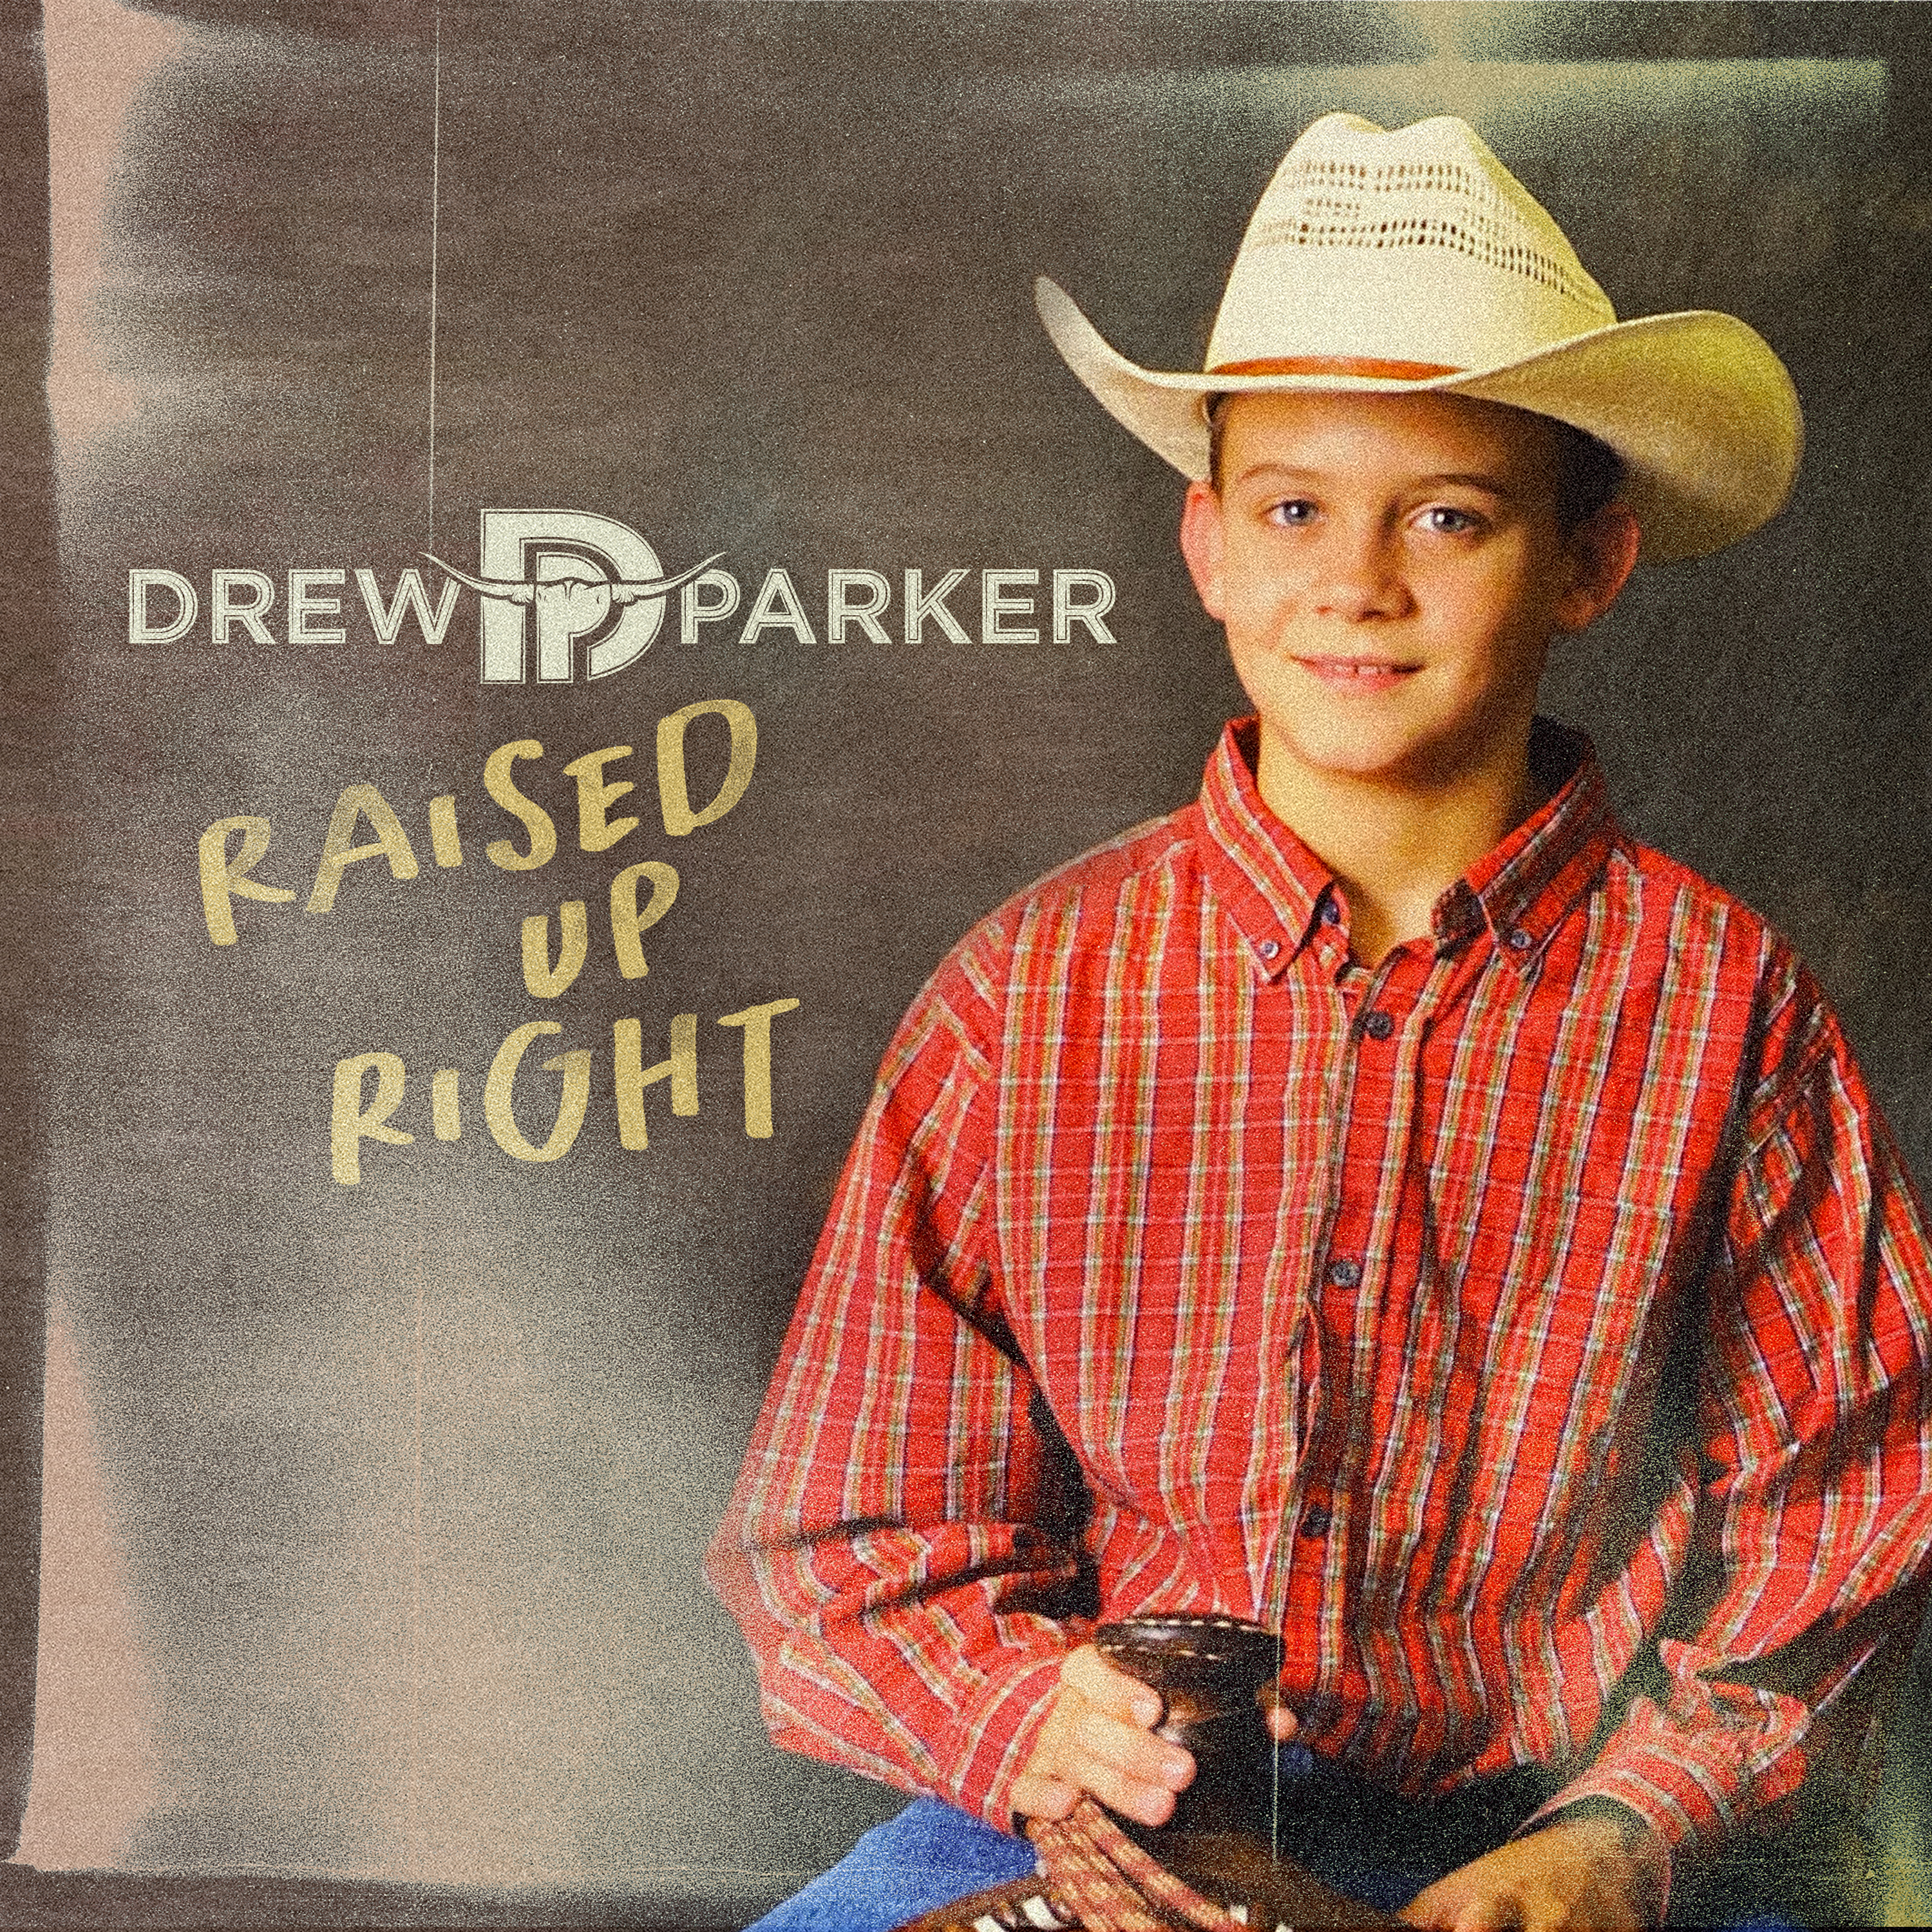 DREW PARKER RELEASES BRAND NEW TRACK “RAISED UP RIGHT”